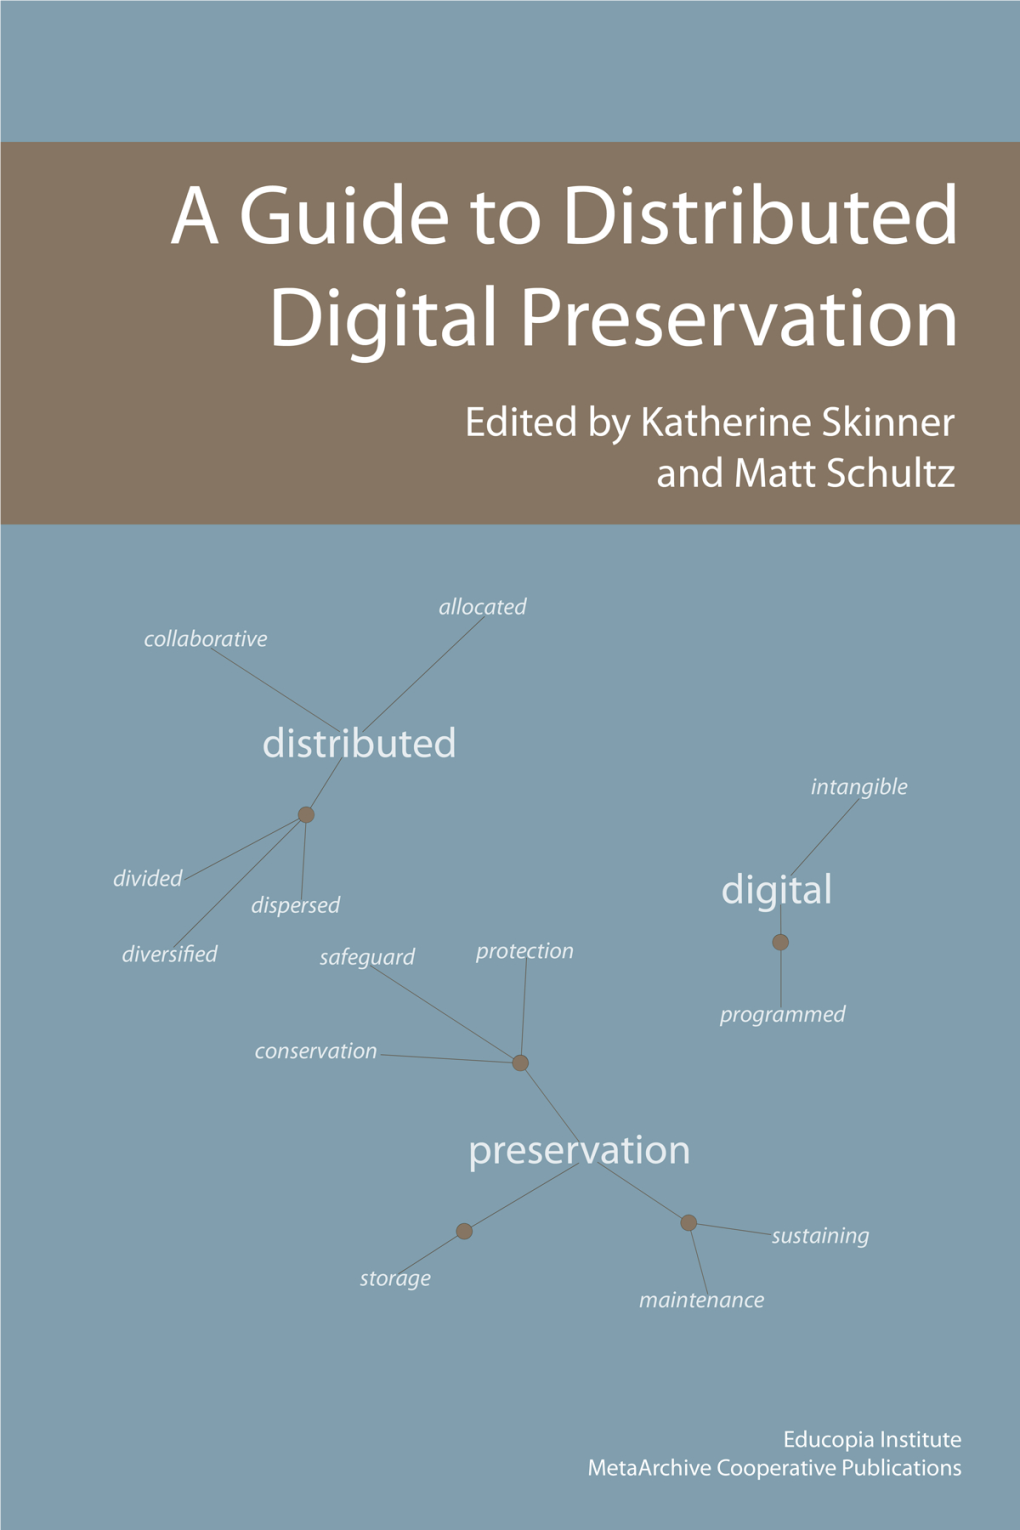 A Guide to Distributed Digital Preservation